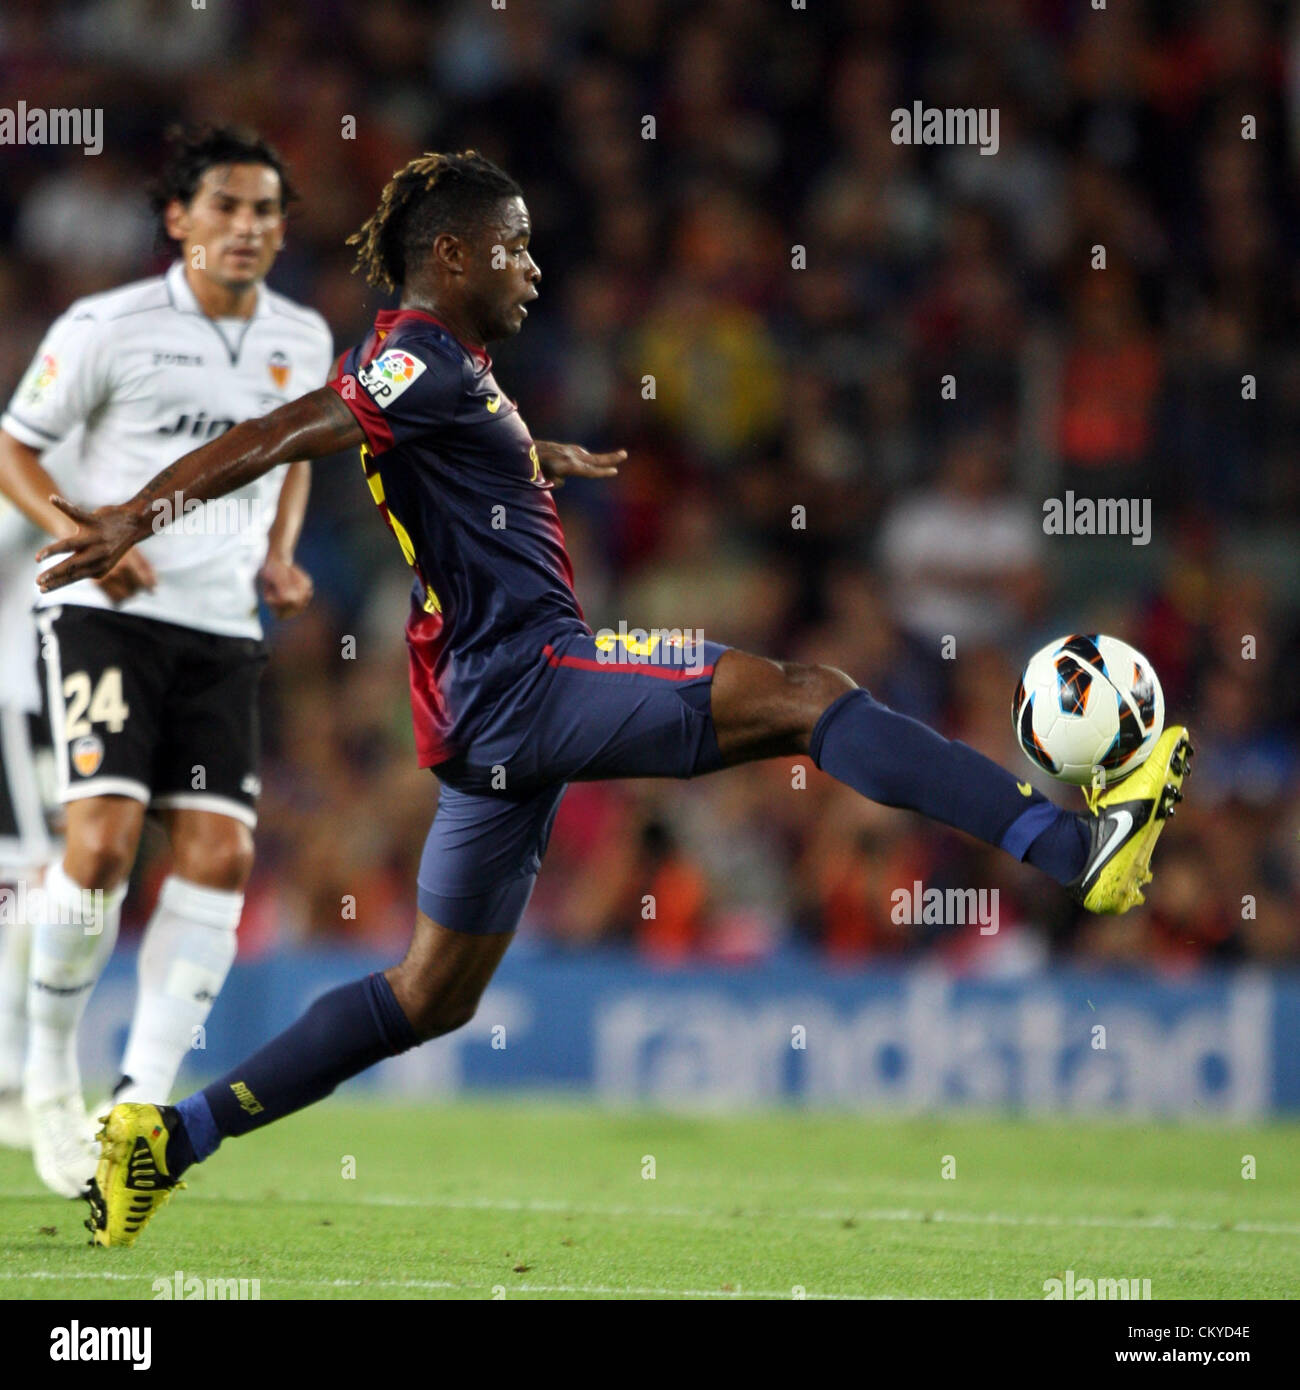 02.09.2012. Barcelona, Spain. Barcelona's Alex Song brings down a diffcult ball during First Division Spanish Liga soccer match - FC Barcelona v Valencia at  Camp Nou  Stadium, Barcelona, Spain Stock Photo